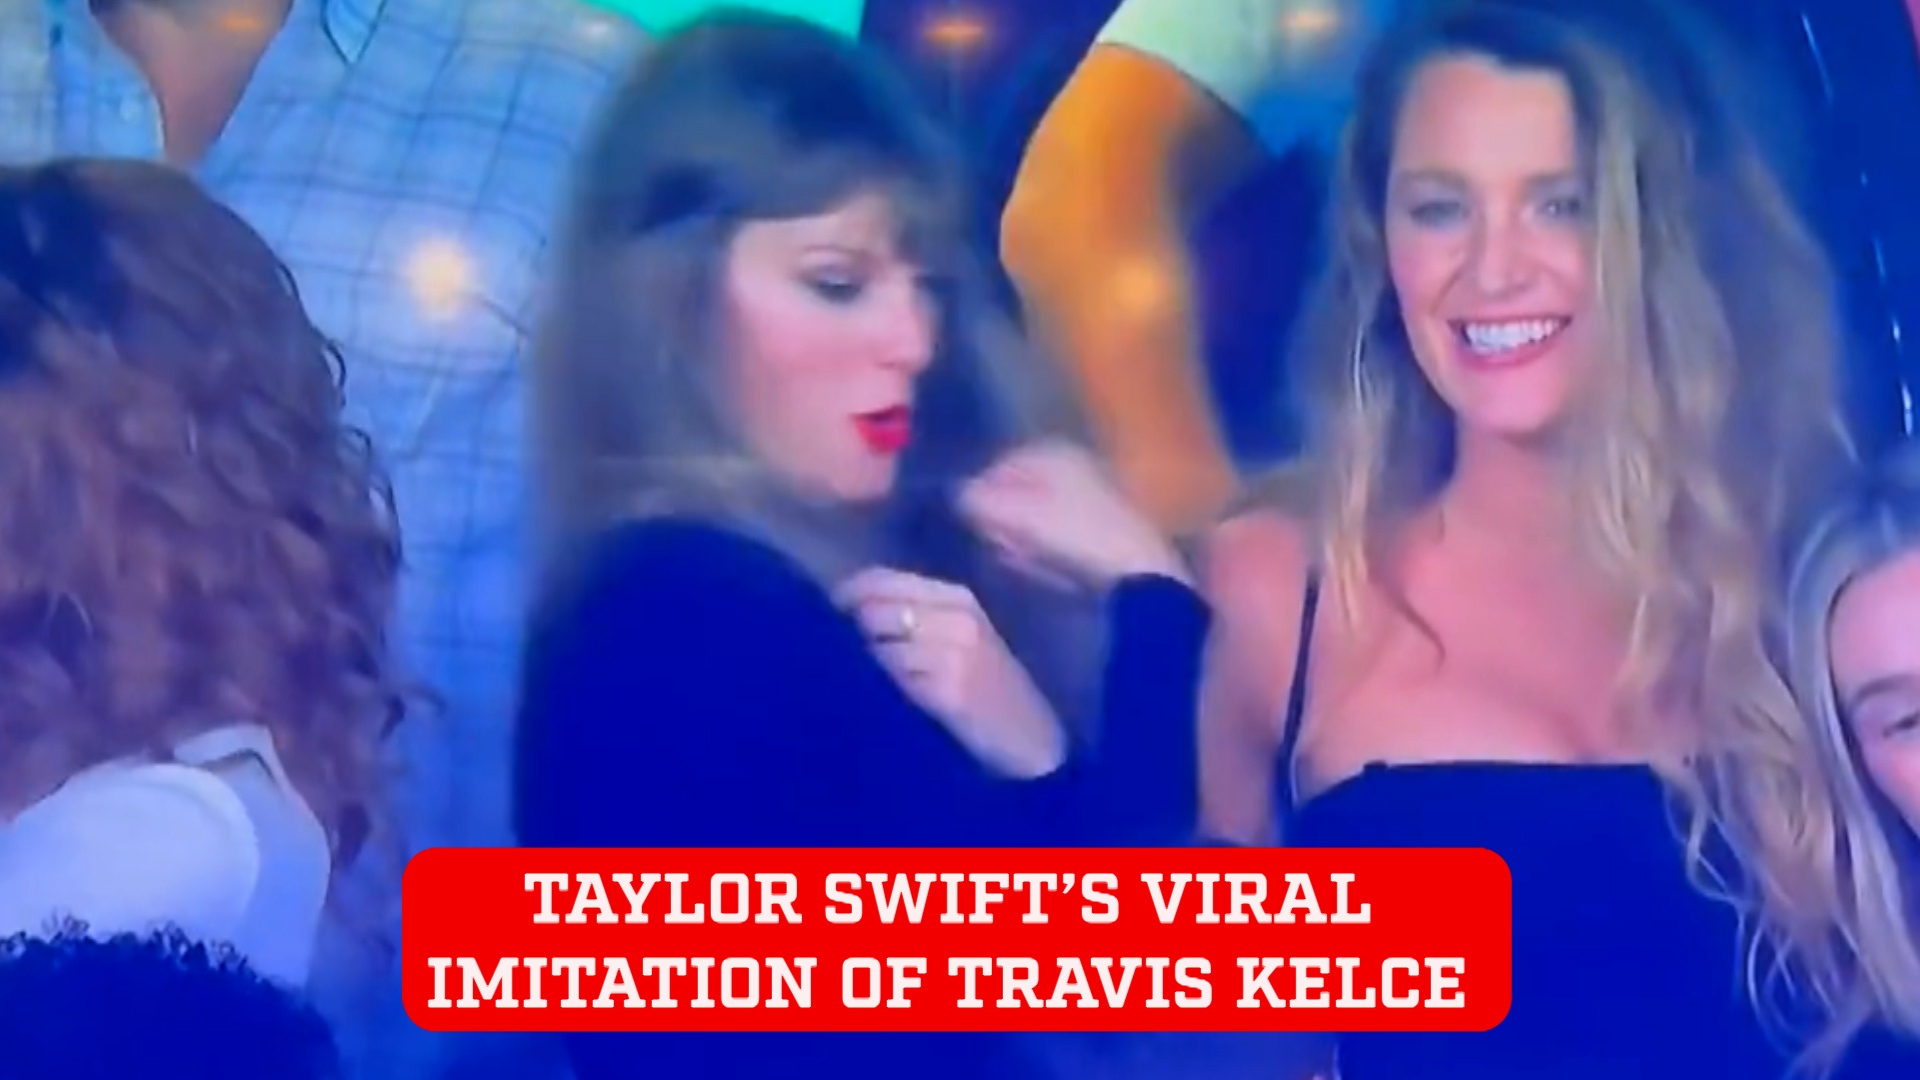 Taylor Swift's viral impersonation of Travis Kelce after Chief's game: 'They're gonna make a great couple'